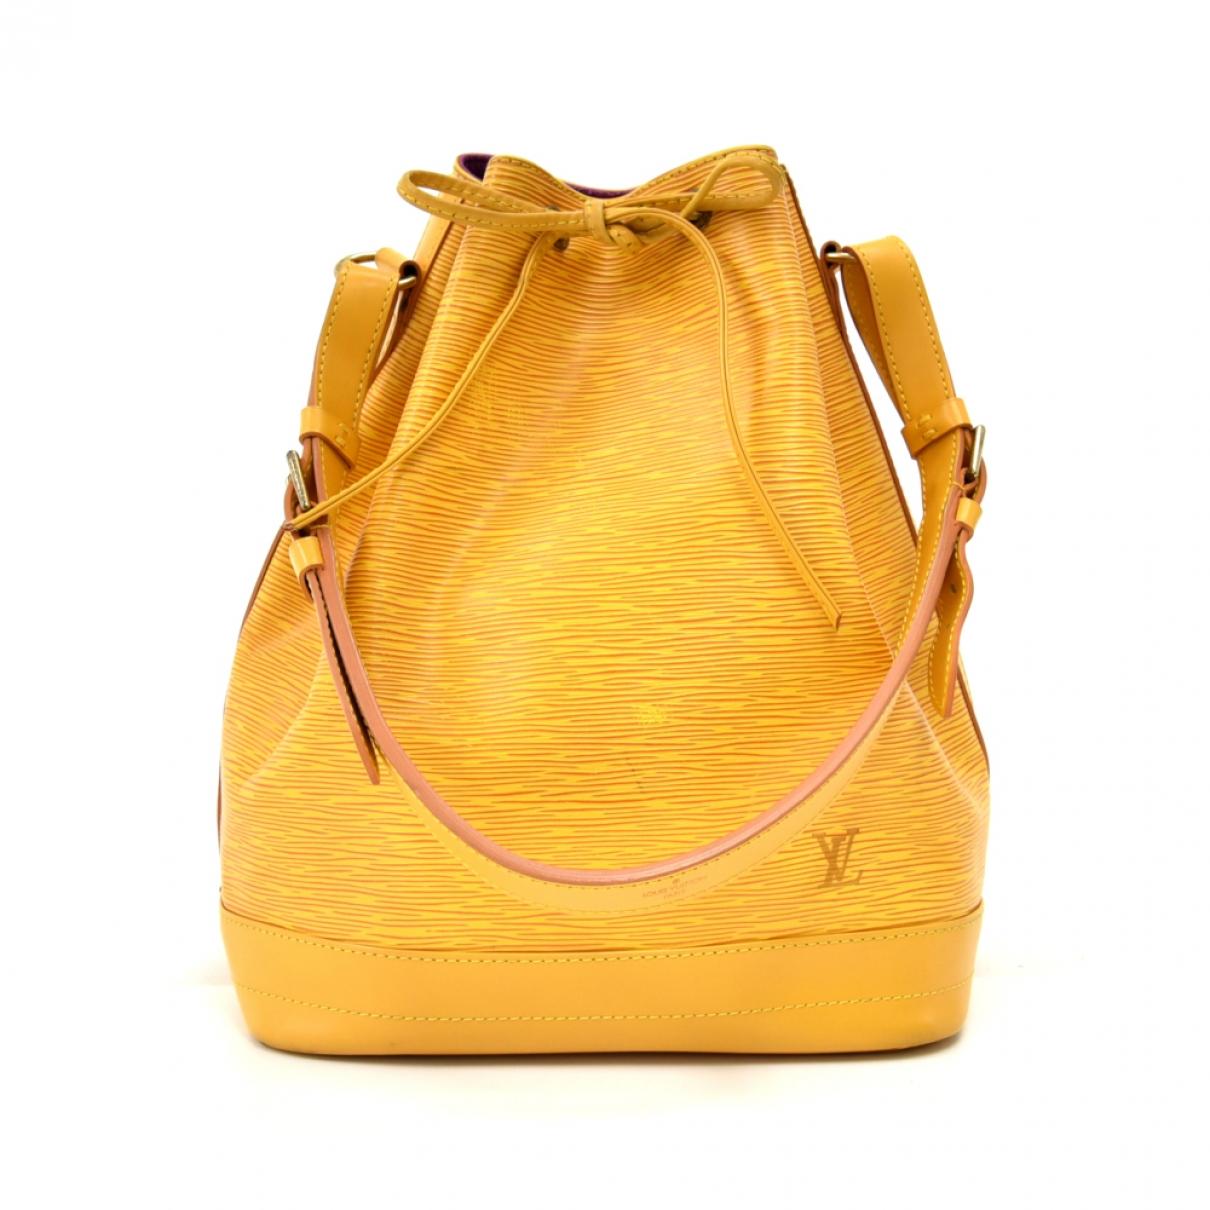 Louis Vuitton Vintage Noé Yellow Leather Handbag in Yellow - Lyst